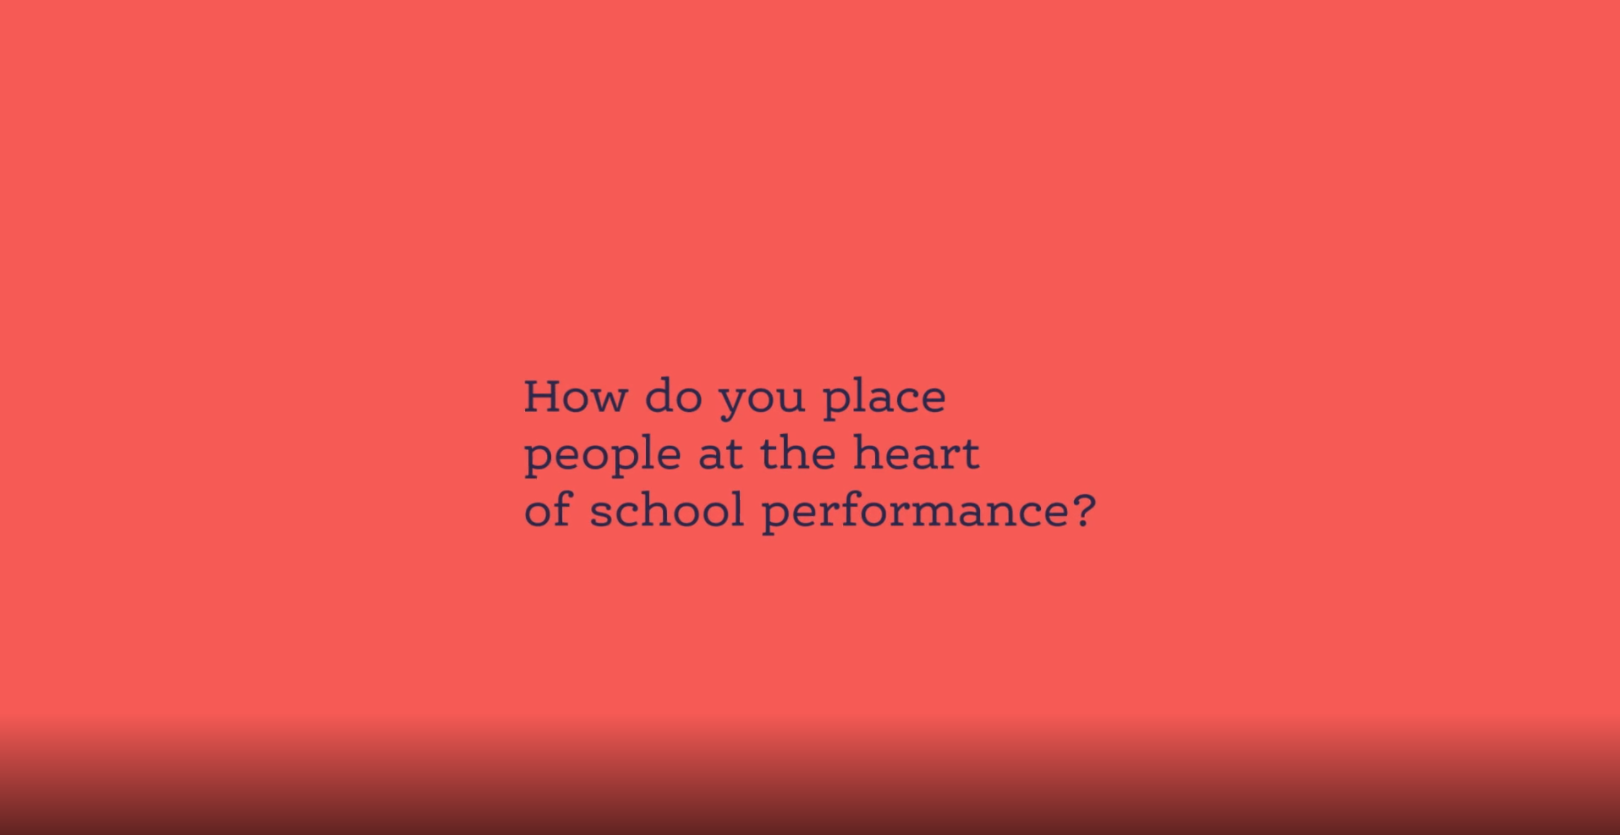 Simple pink background with the words - How do you place people at the heart of school performance? in blue.